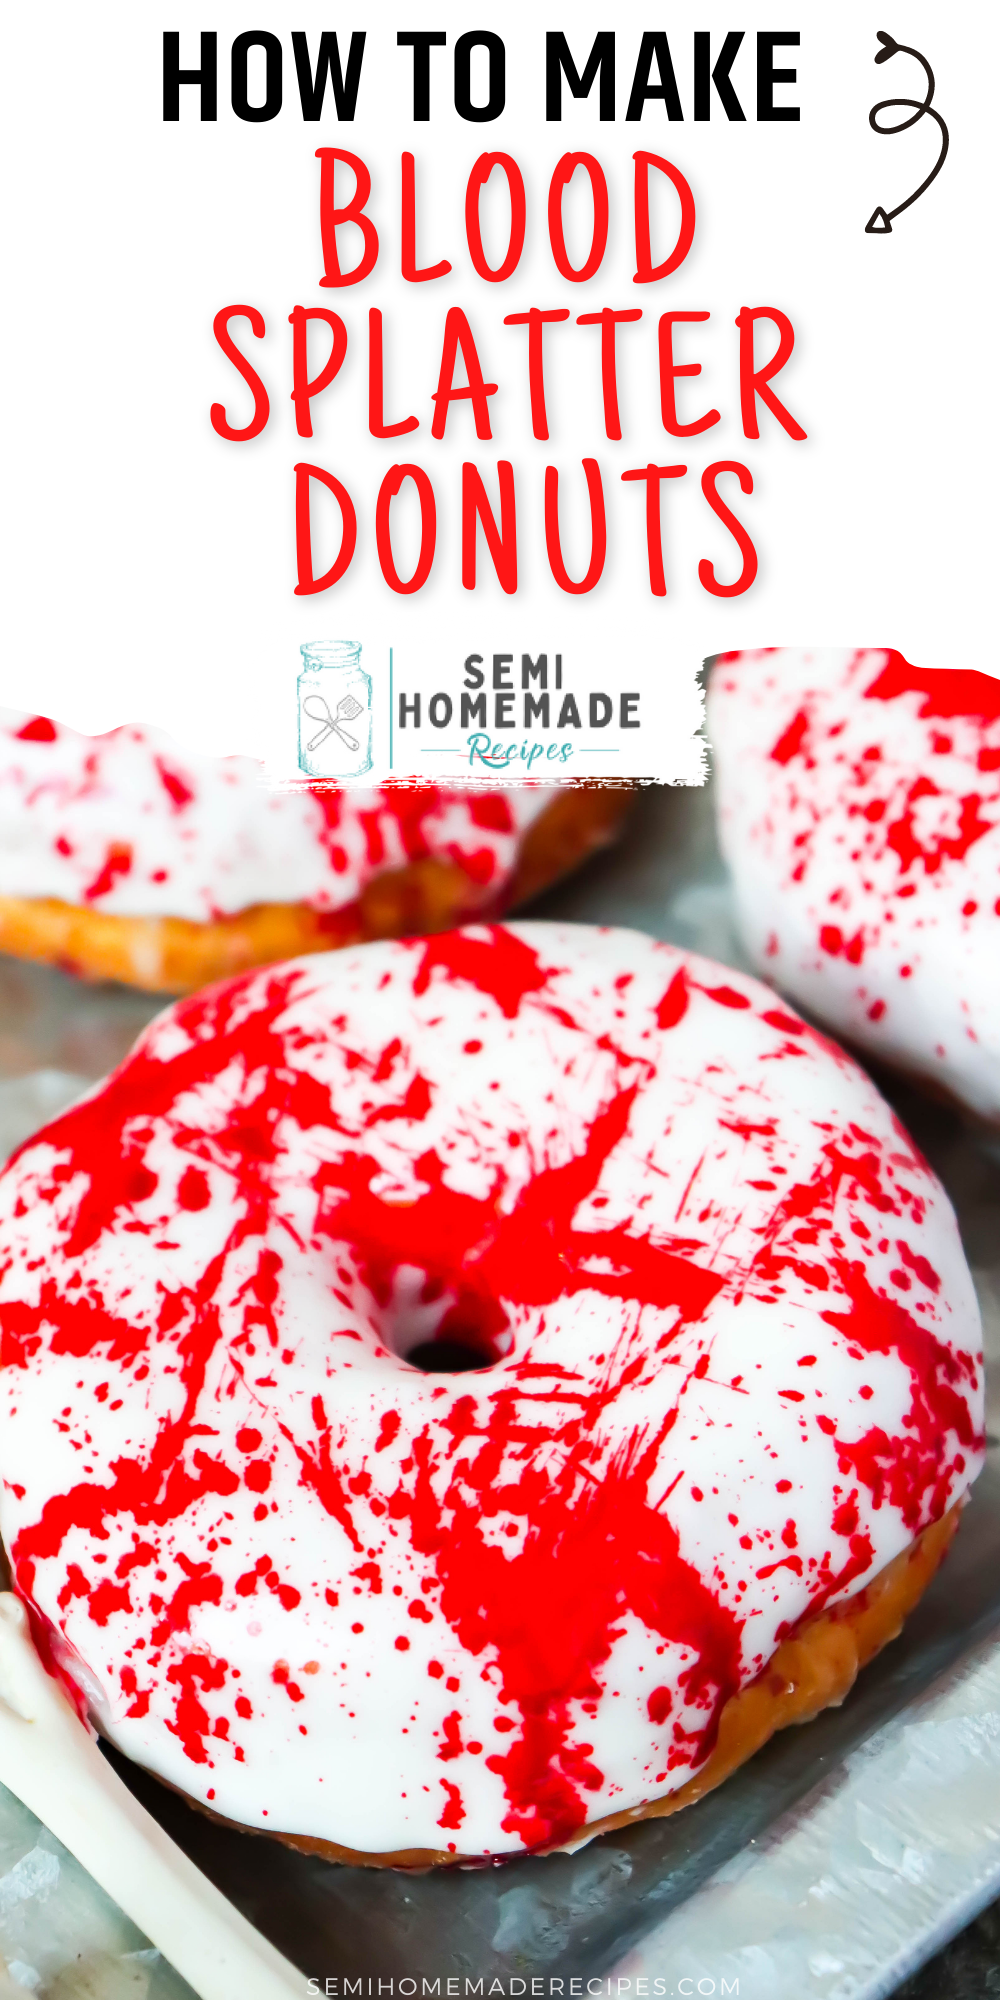 A blood splatter dessert that is perfect for Halloween. You only need a few things like, Donuts, a powdered sugar frosting and food coloring for this spooky dessert!